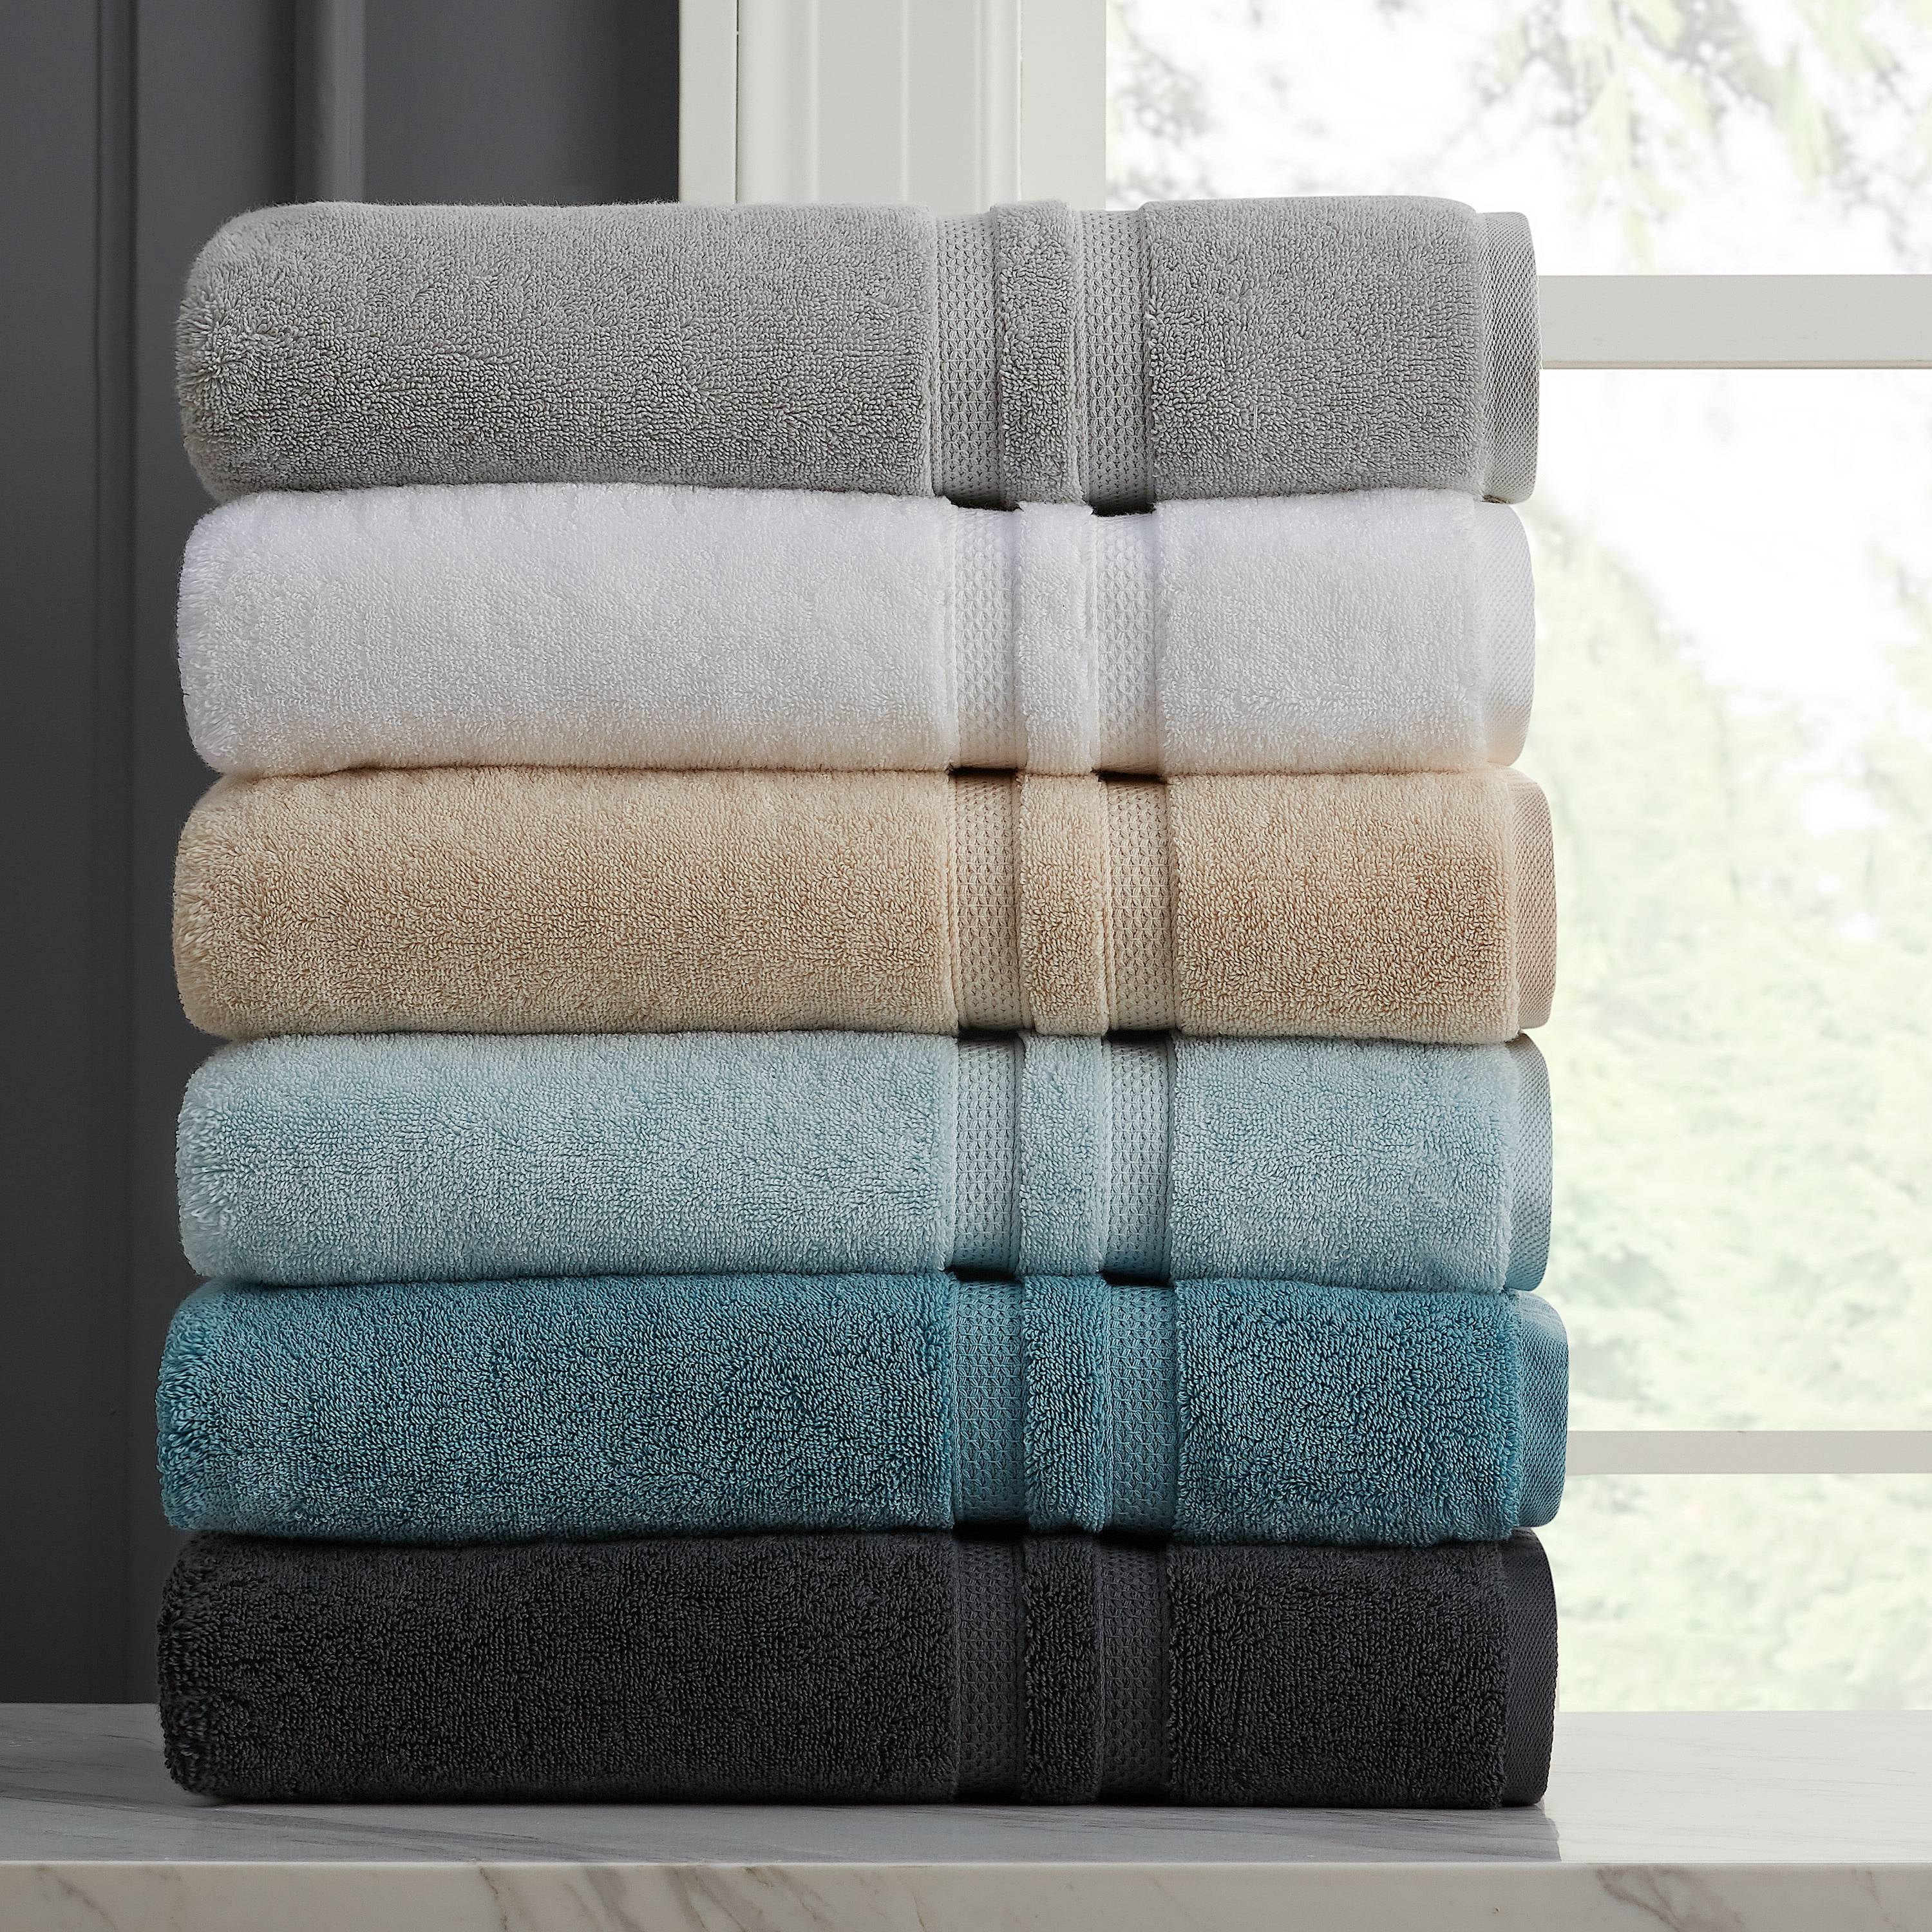 Bath Towels Luxury Turkish Cotton 4 Piece Extra Large Thick Soft Plush Absorbent 